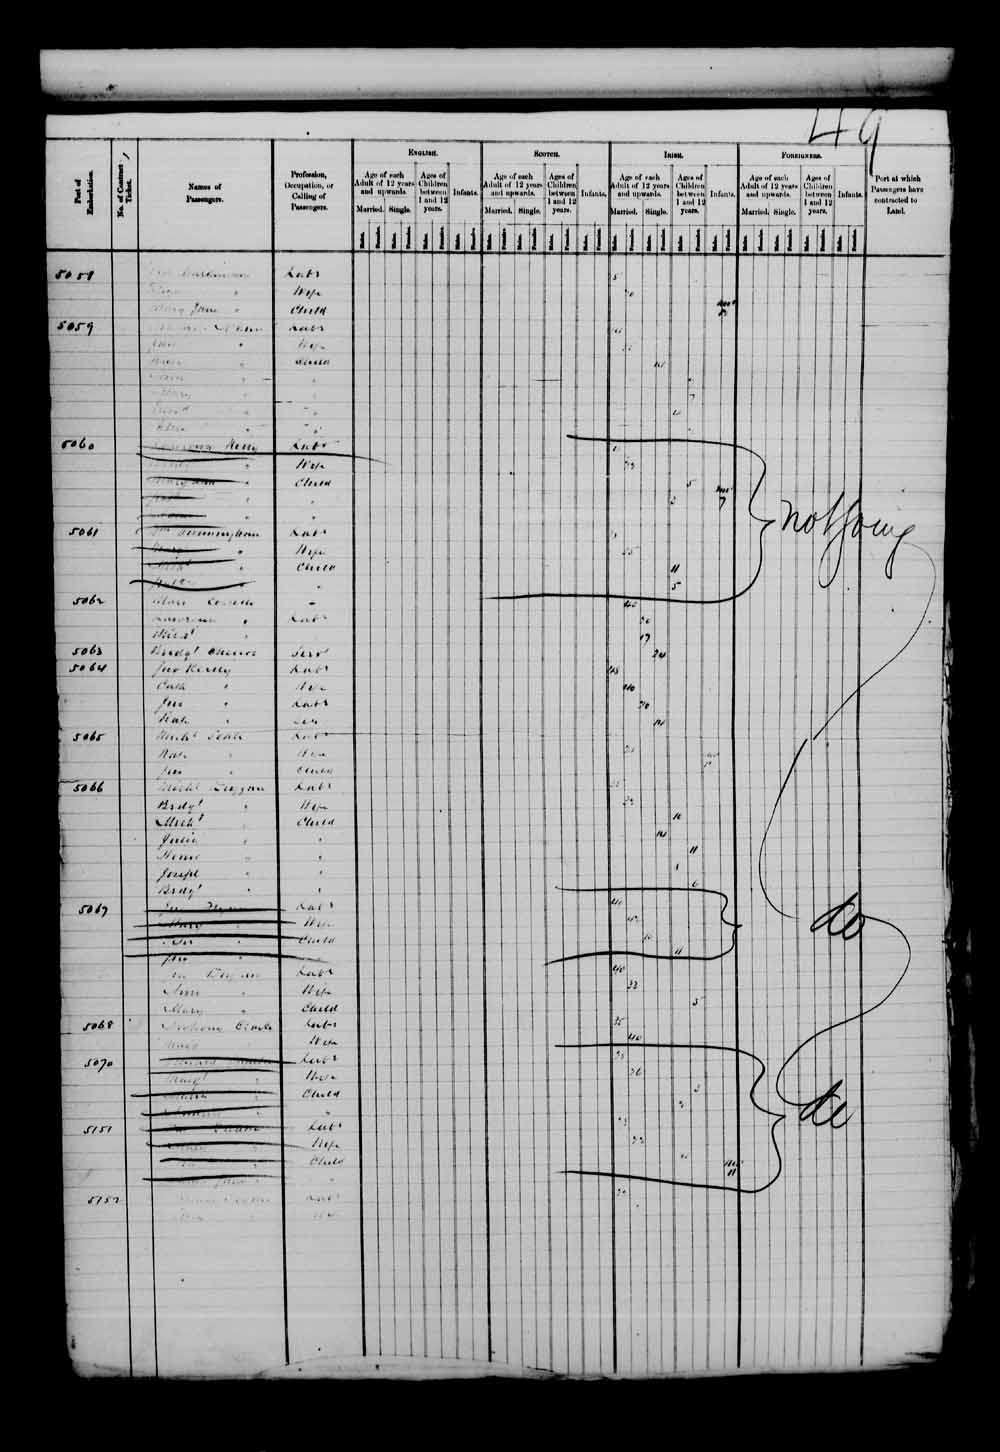 Digitized page of Passenger Lists for Image No.: e003543407